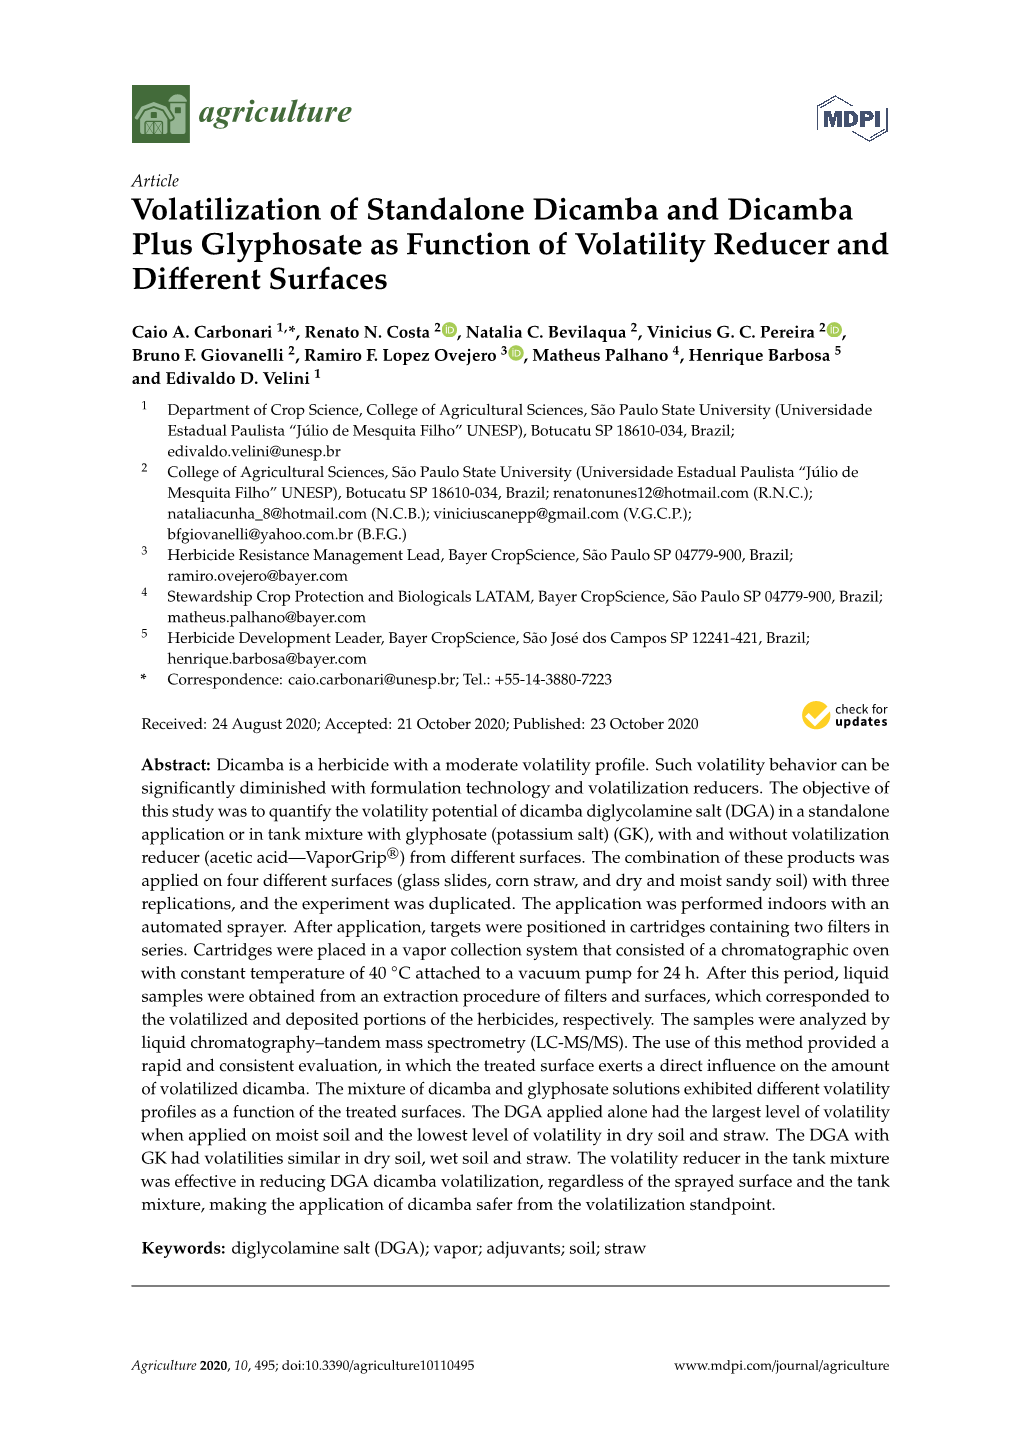 Volatilization of Standalone Dicamba and Dicamba Plus Glyphosate As Function of Volatility Reducer and Diﬀerent Surfaces